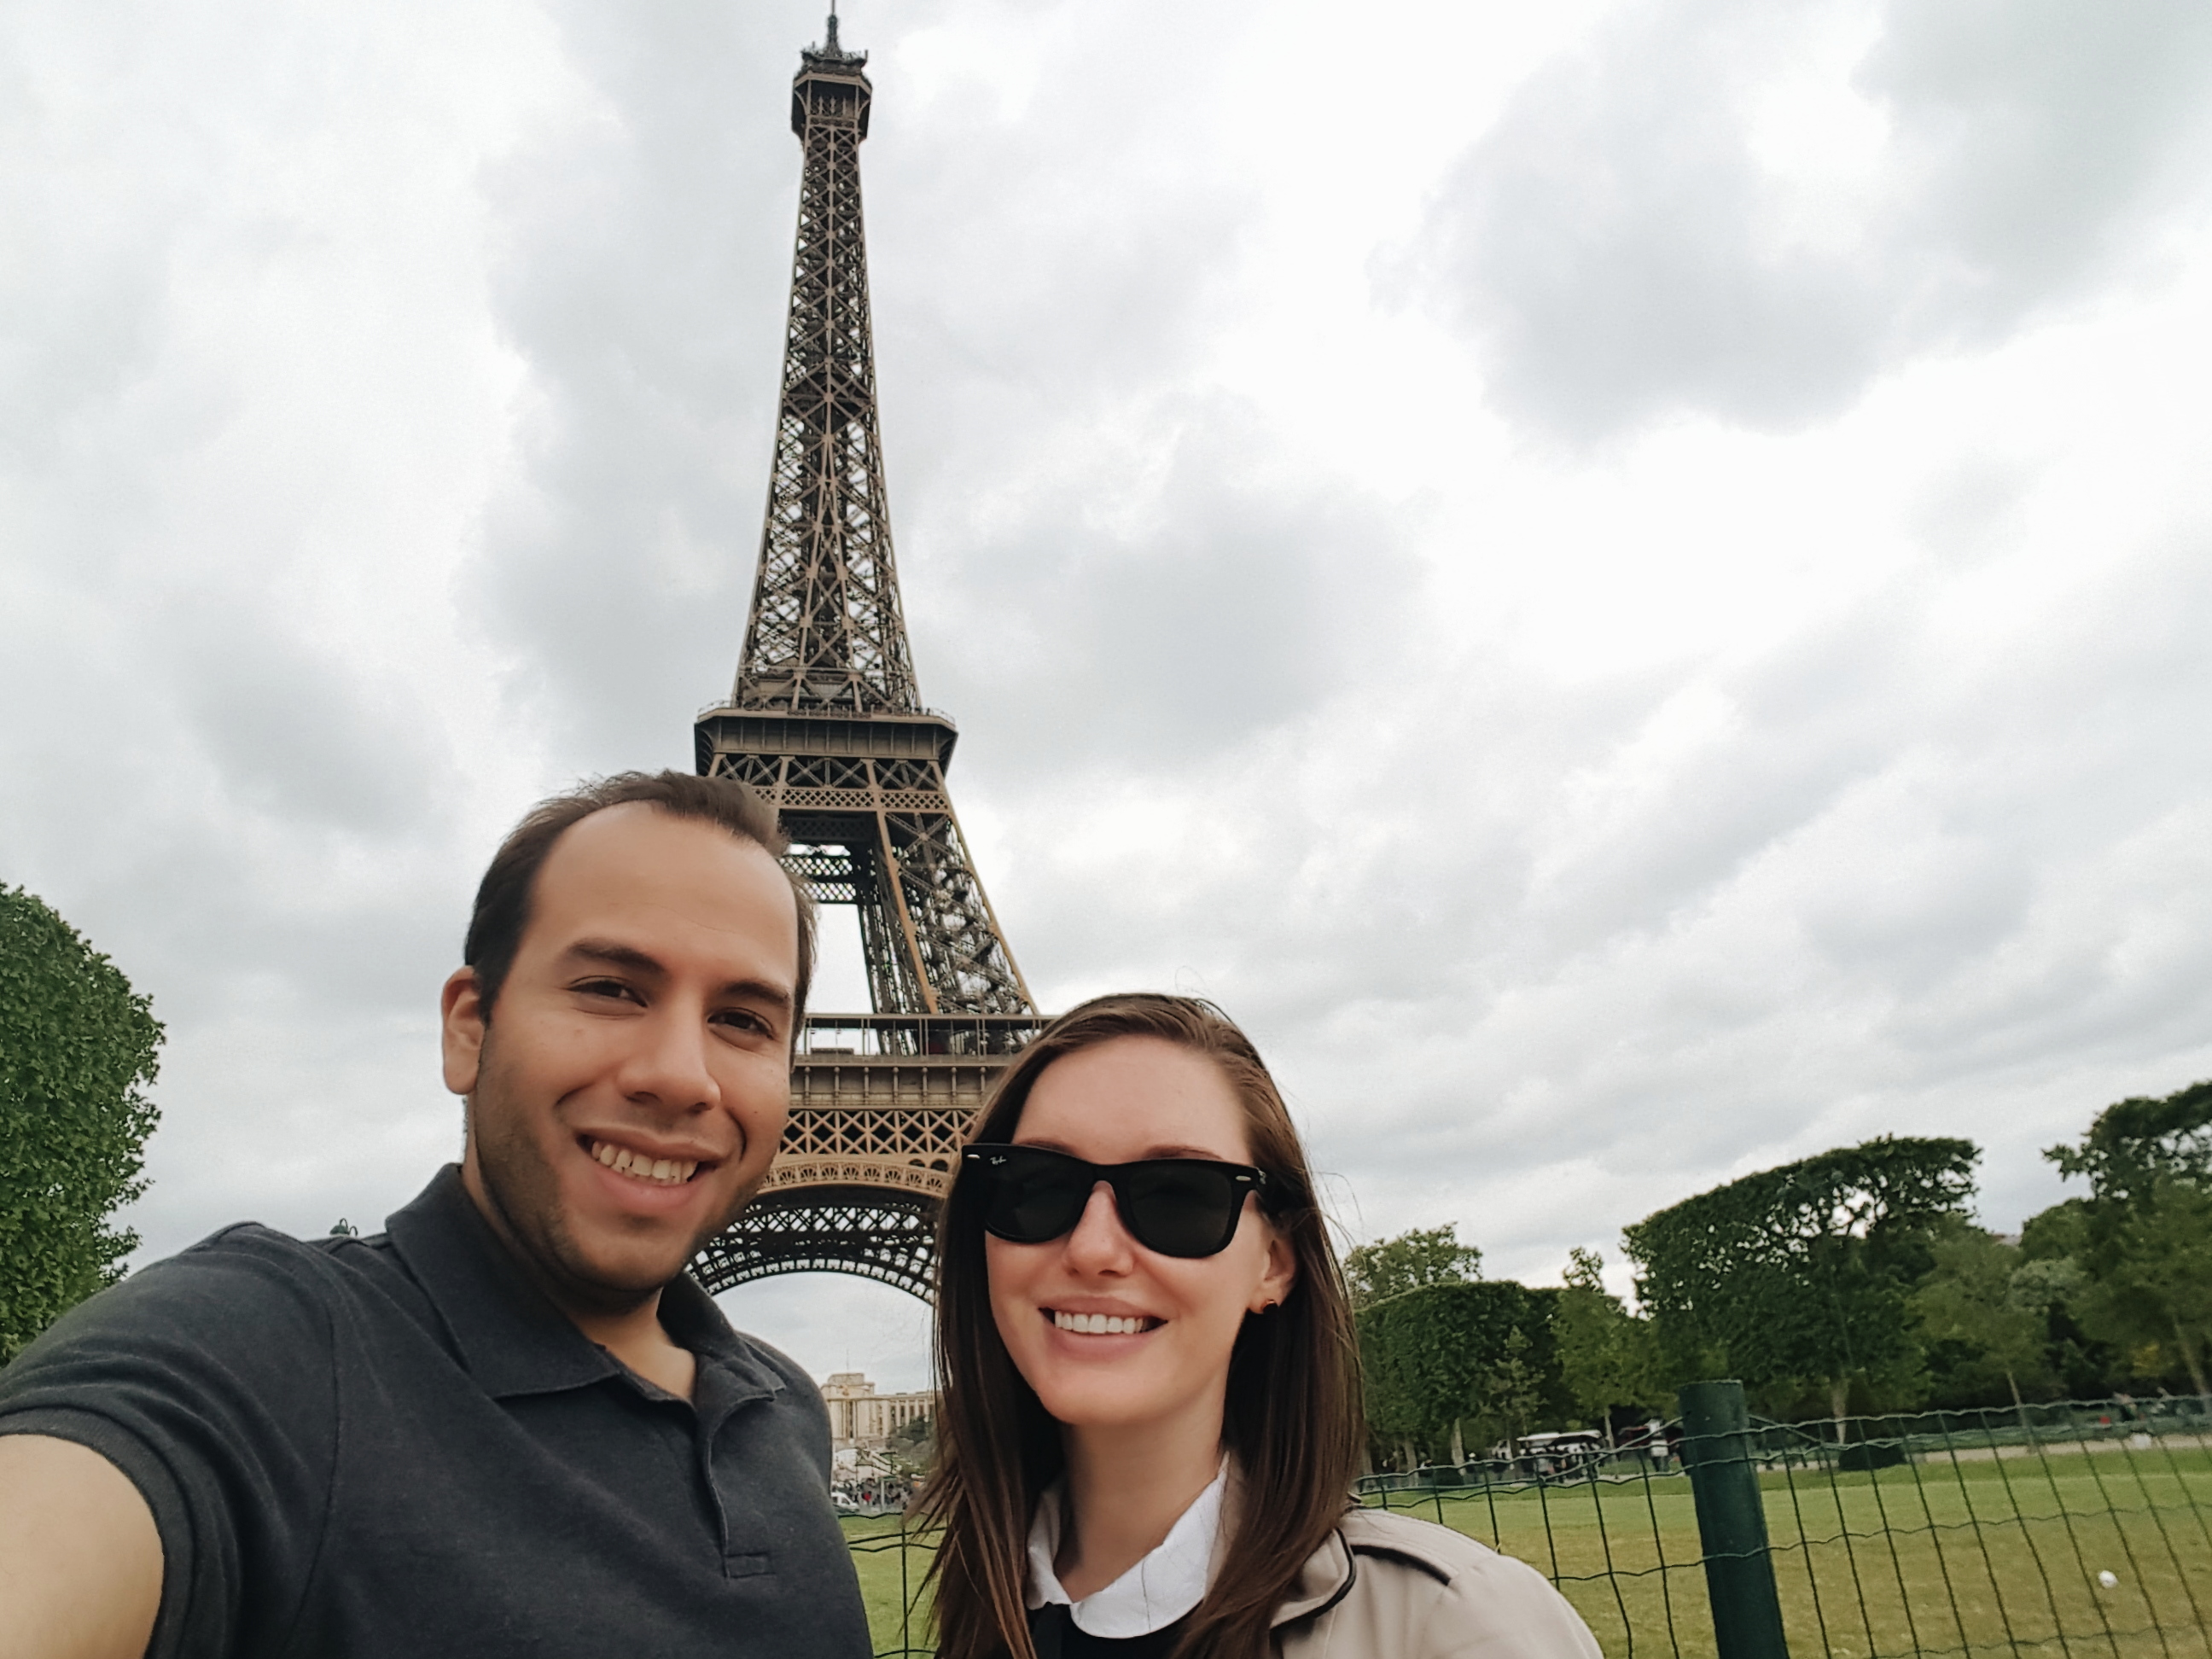 Alyssa and Michael in front of Eiffel Tower, Paris, France